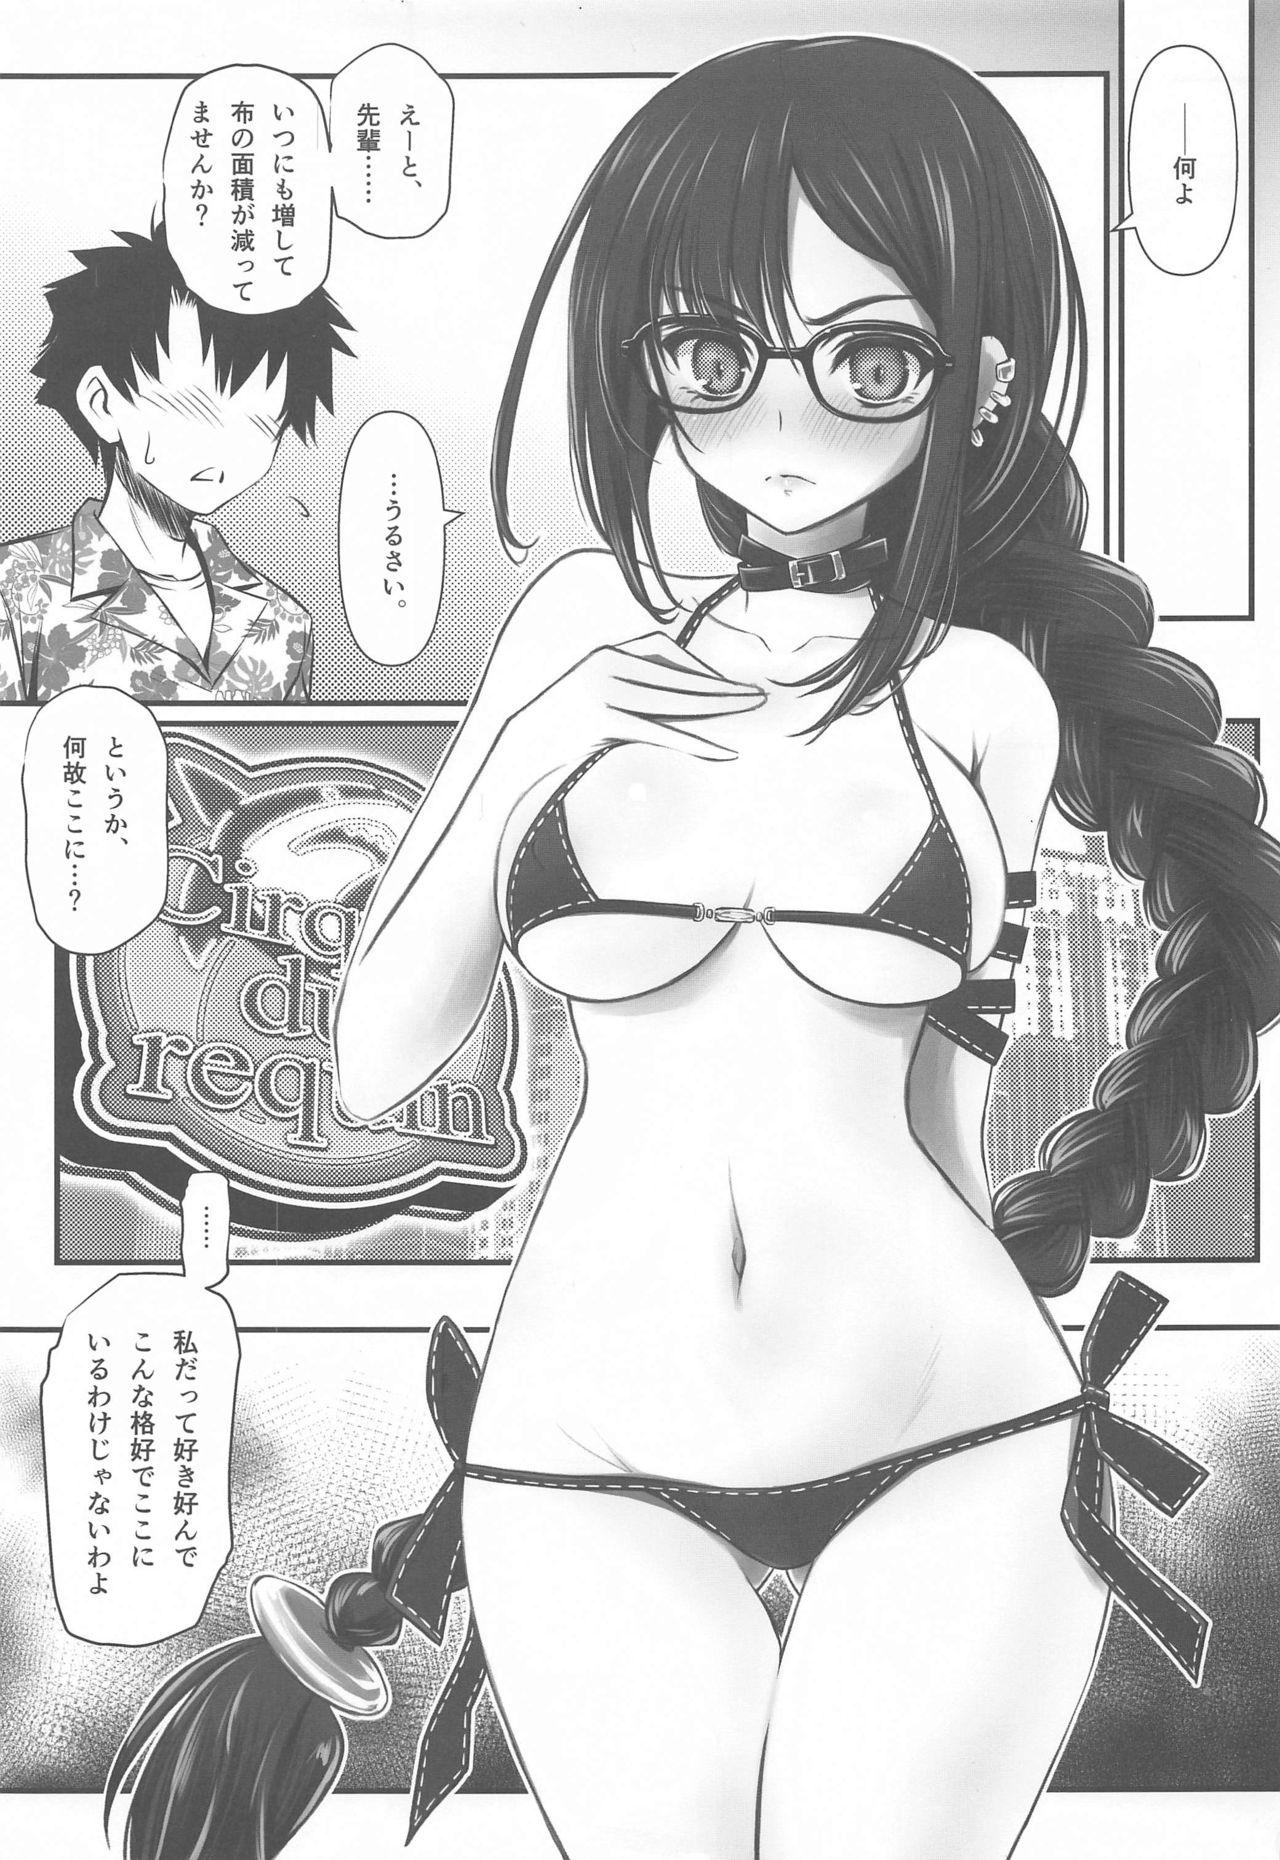 Real Amatuer Porn [Yakan Honpo (Inoue Tommy)] Megane Senpai Onee-chan - FGO Cute Glasses Sister(s) (Fate/Grand Order) - Fate grand order Wet - Page 2